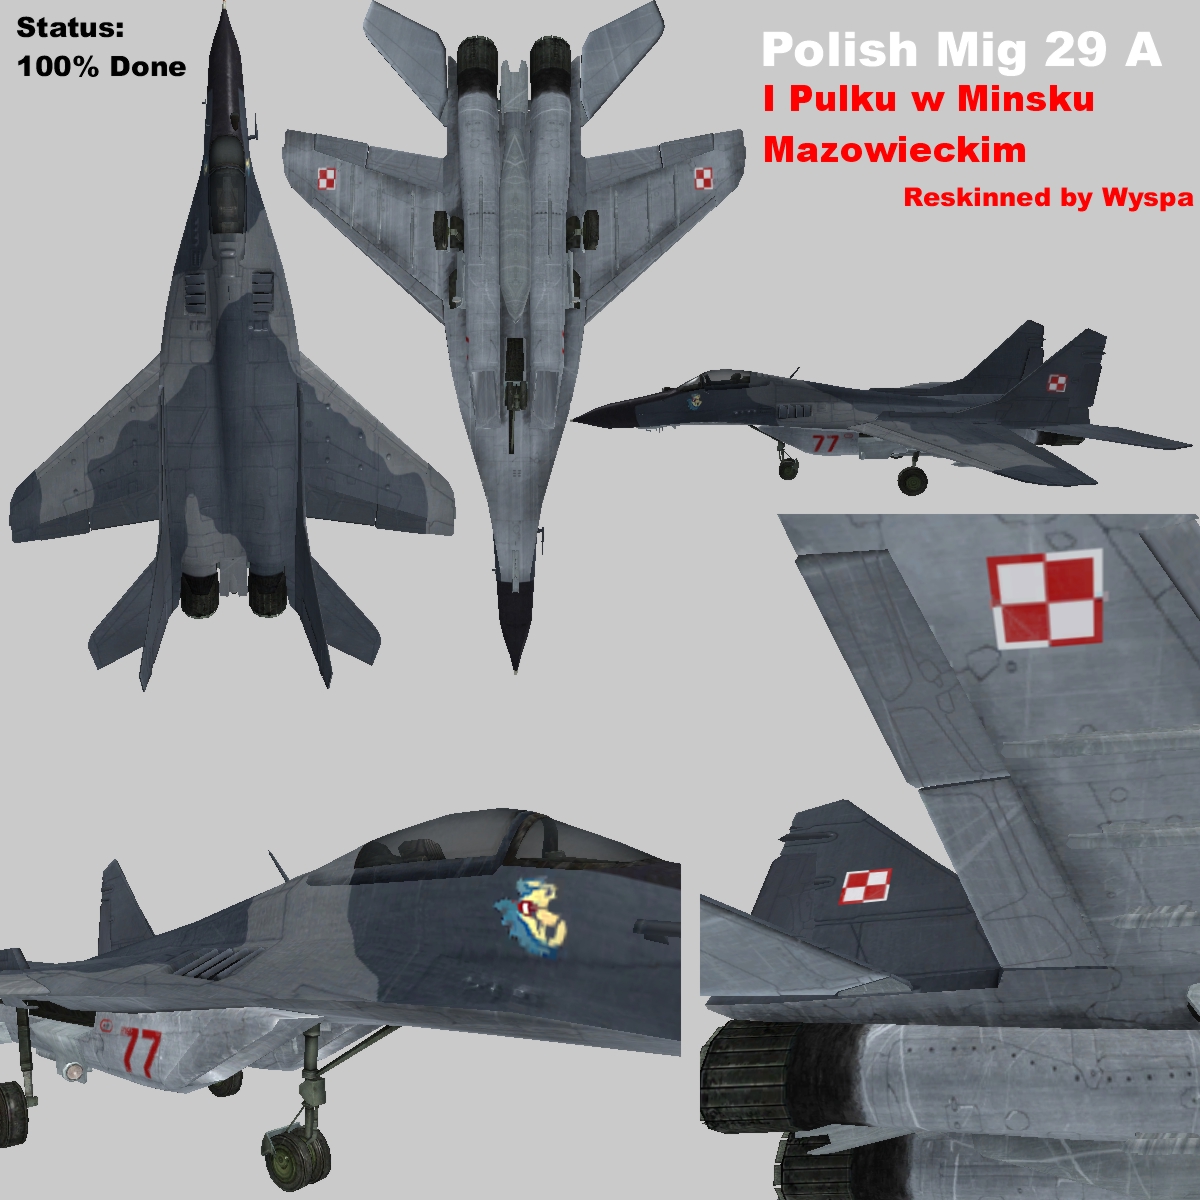 Project Reality - Polisch Project Mig 29 